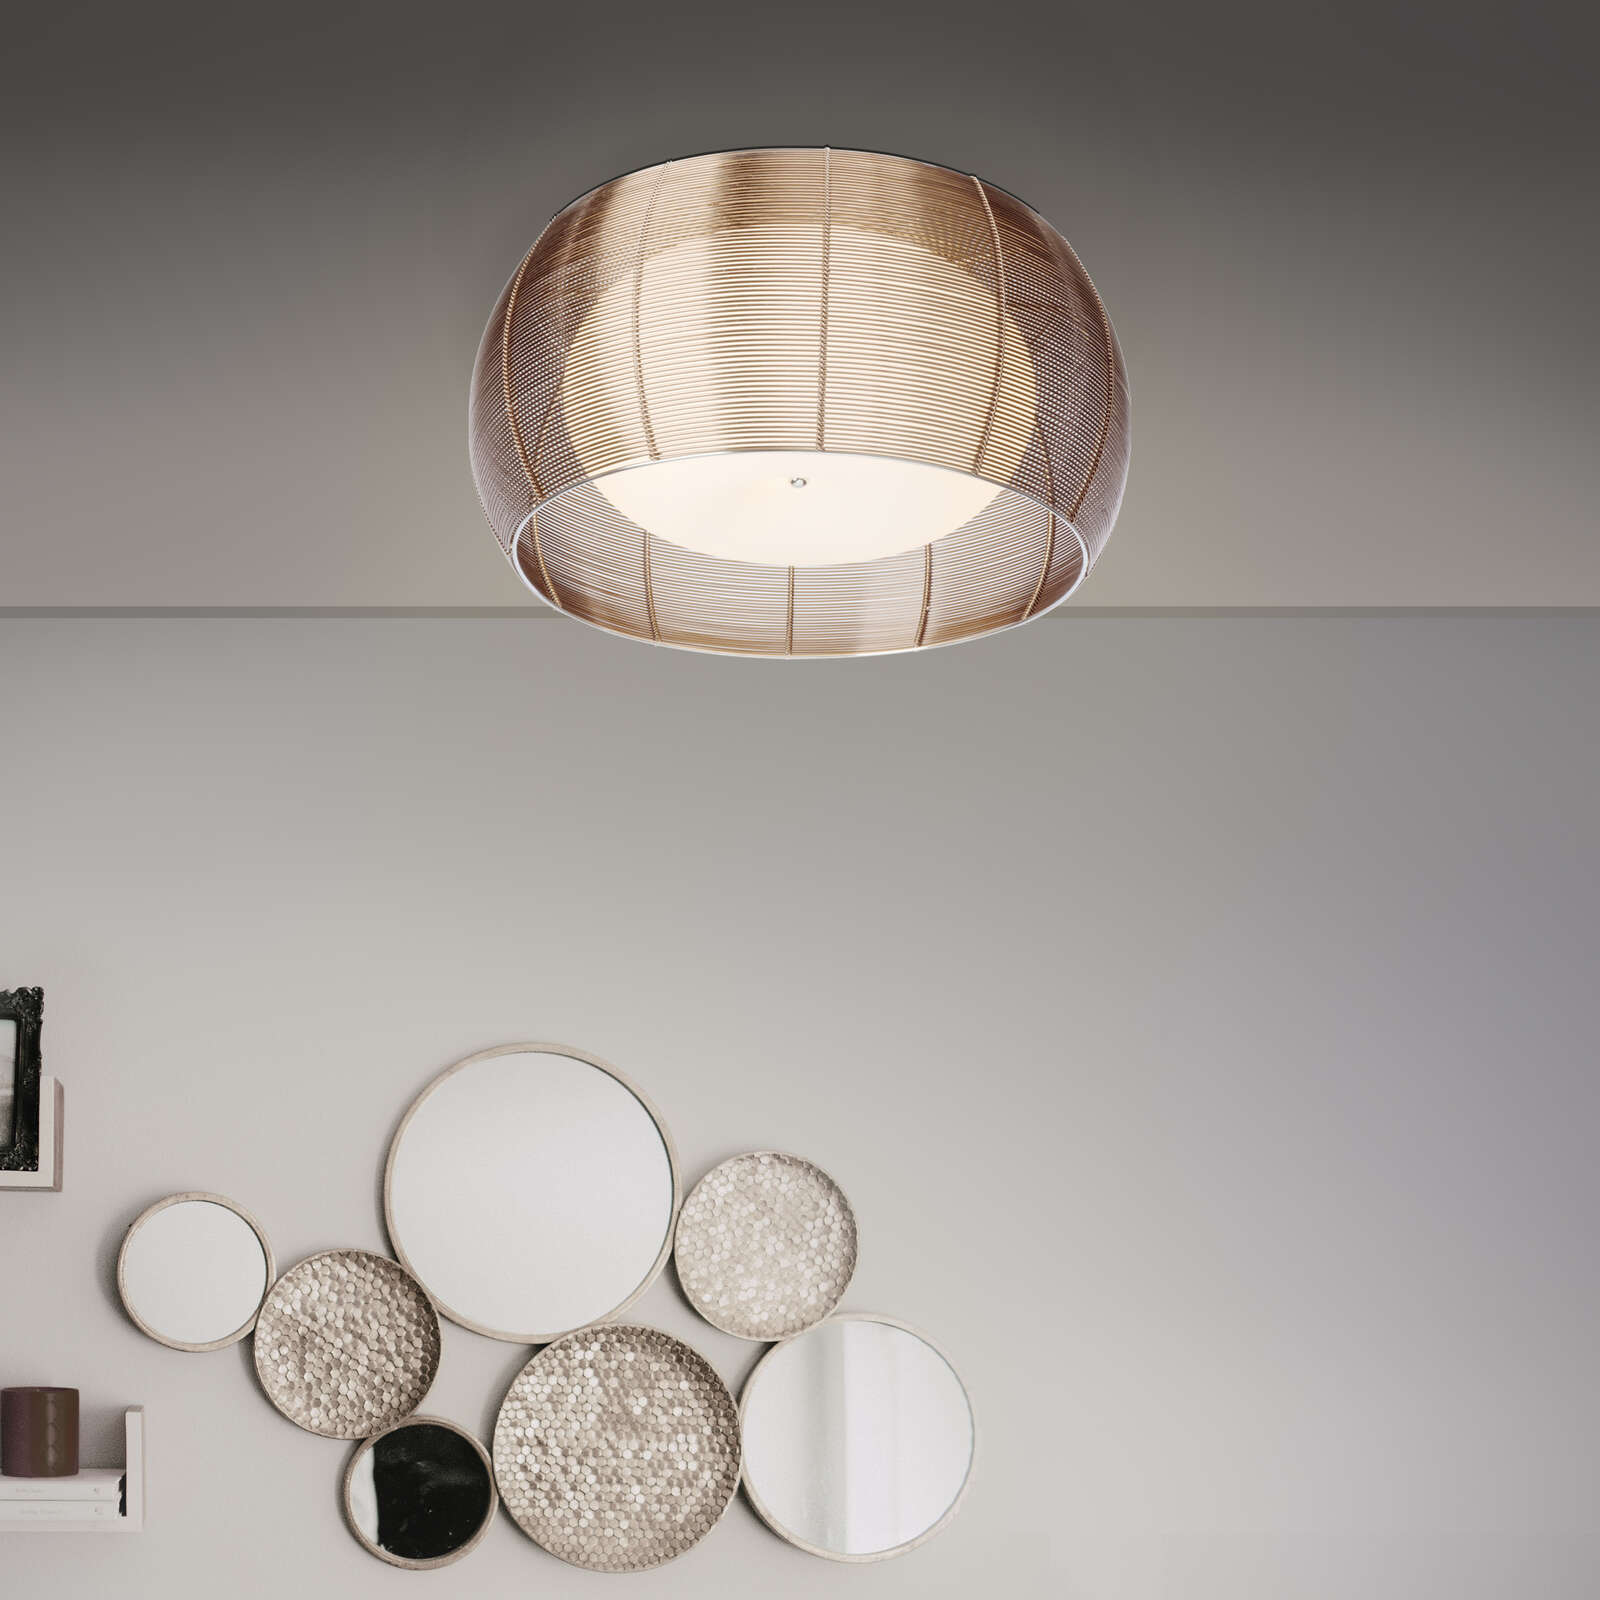             Glass ceiling light - Maxime 10 - Brown
        